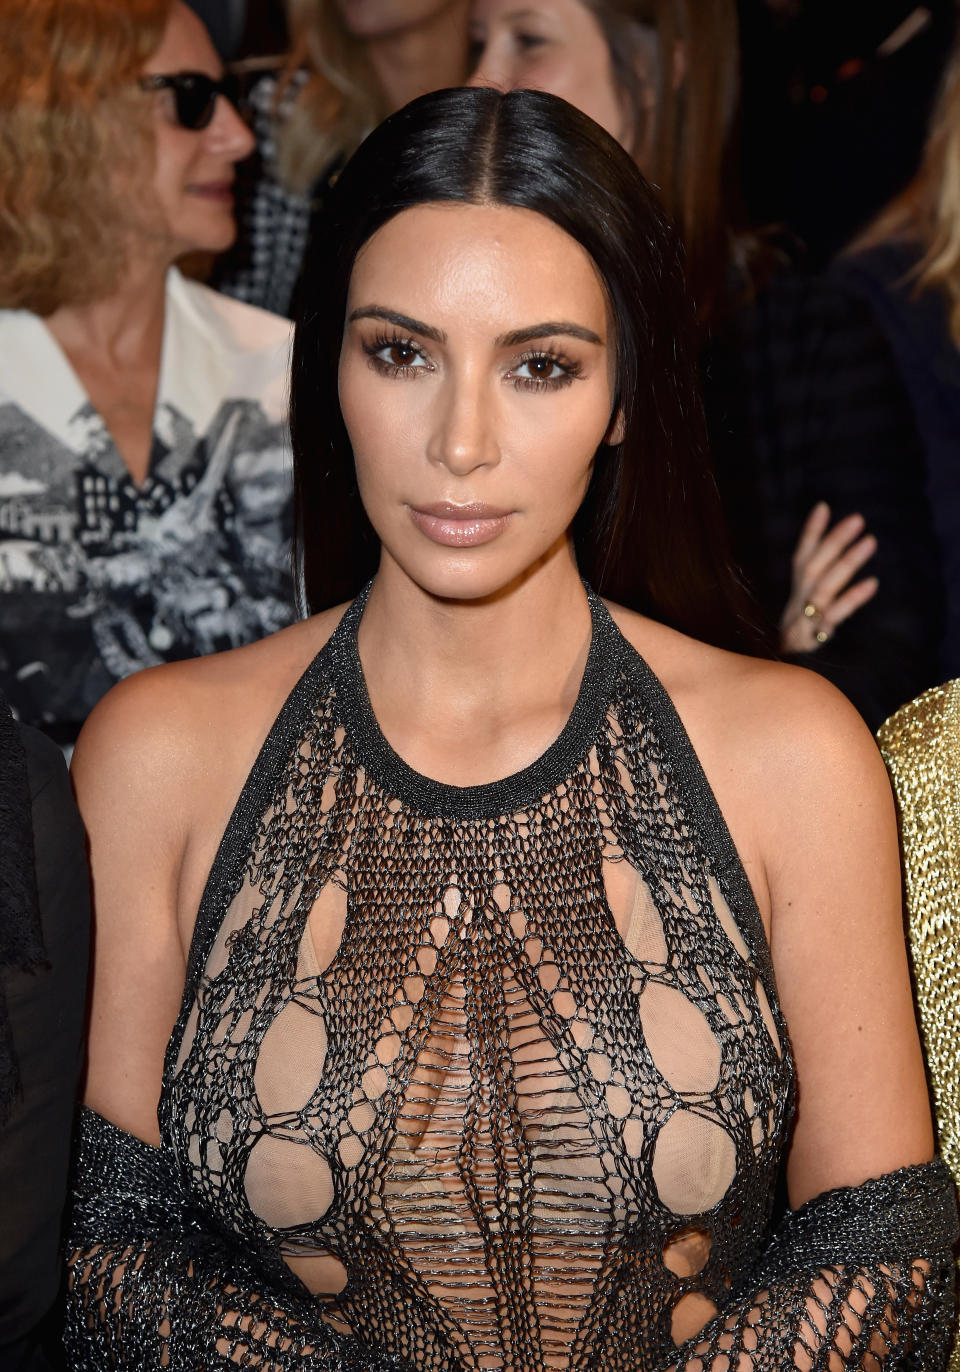 Kim Kardashian wore track pants to a fashion show and we’re bowing down at the realness